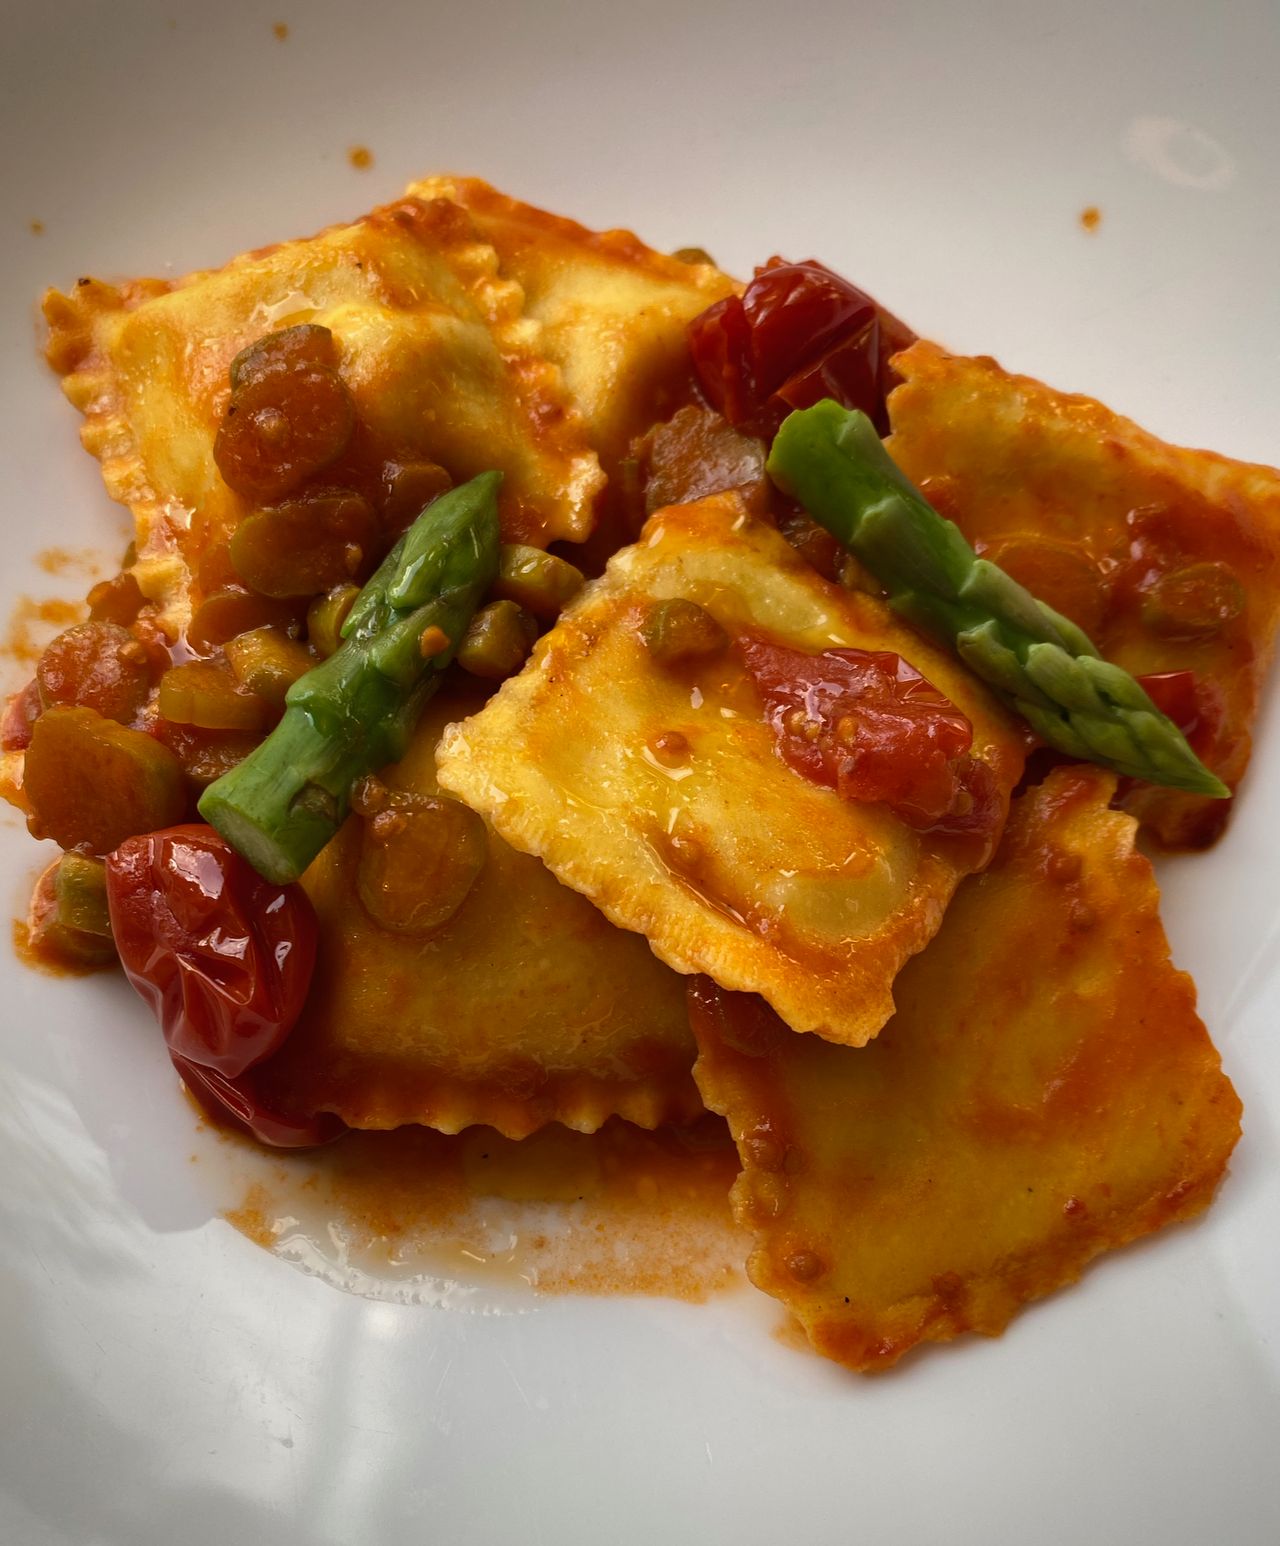 Ravioli with red sauce and green asparagus.